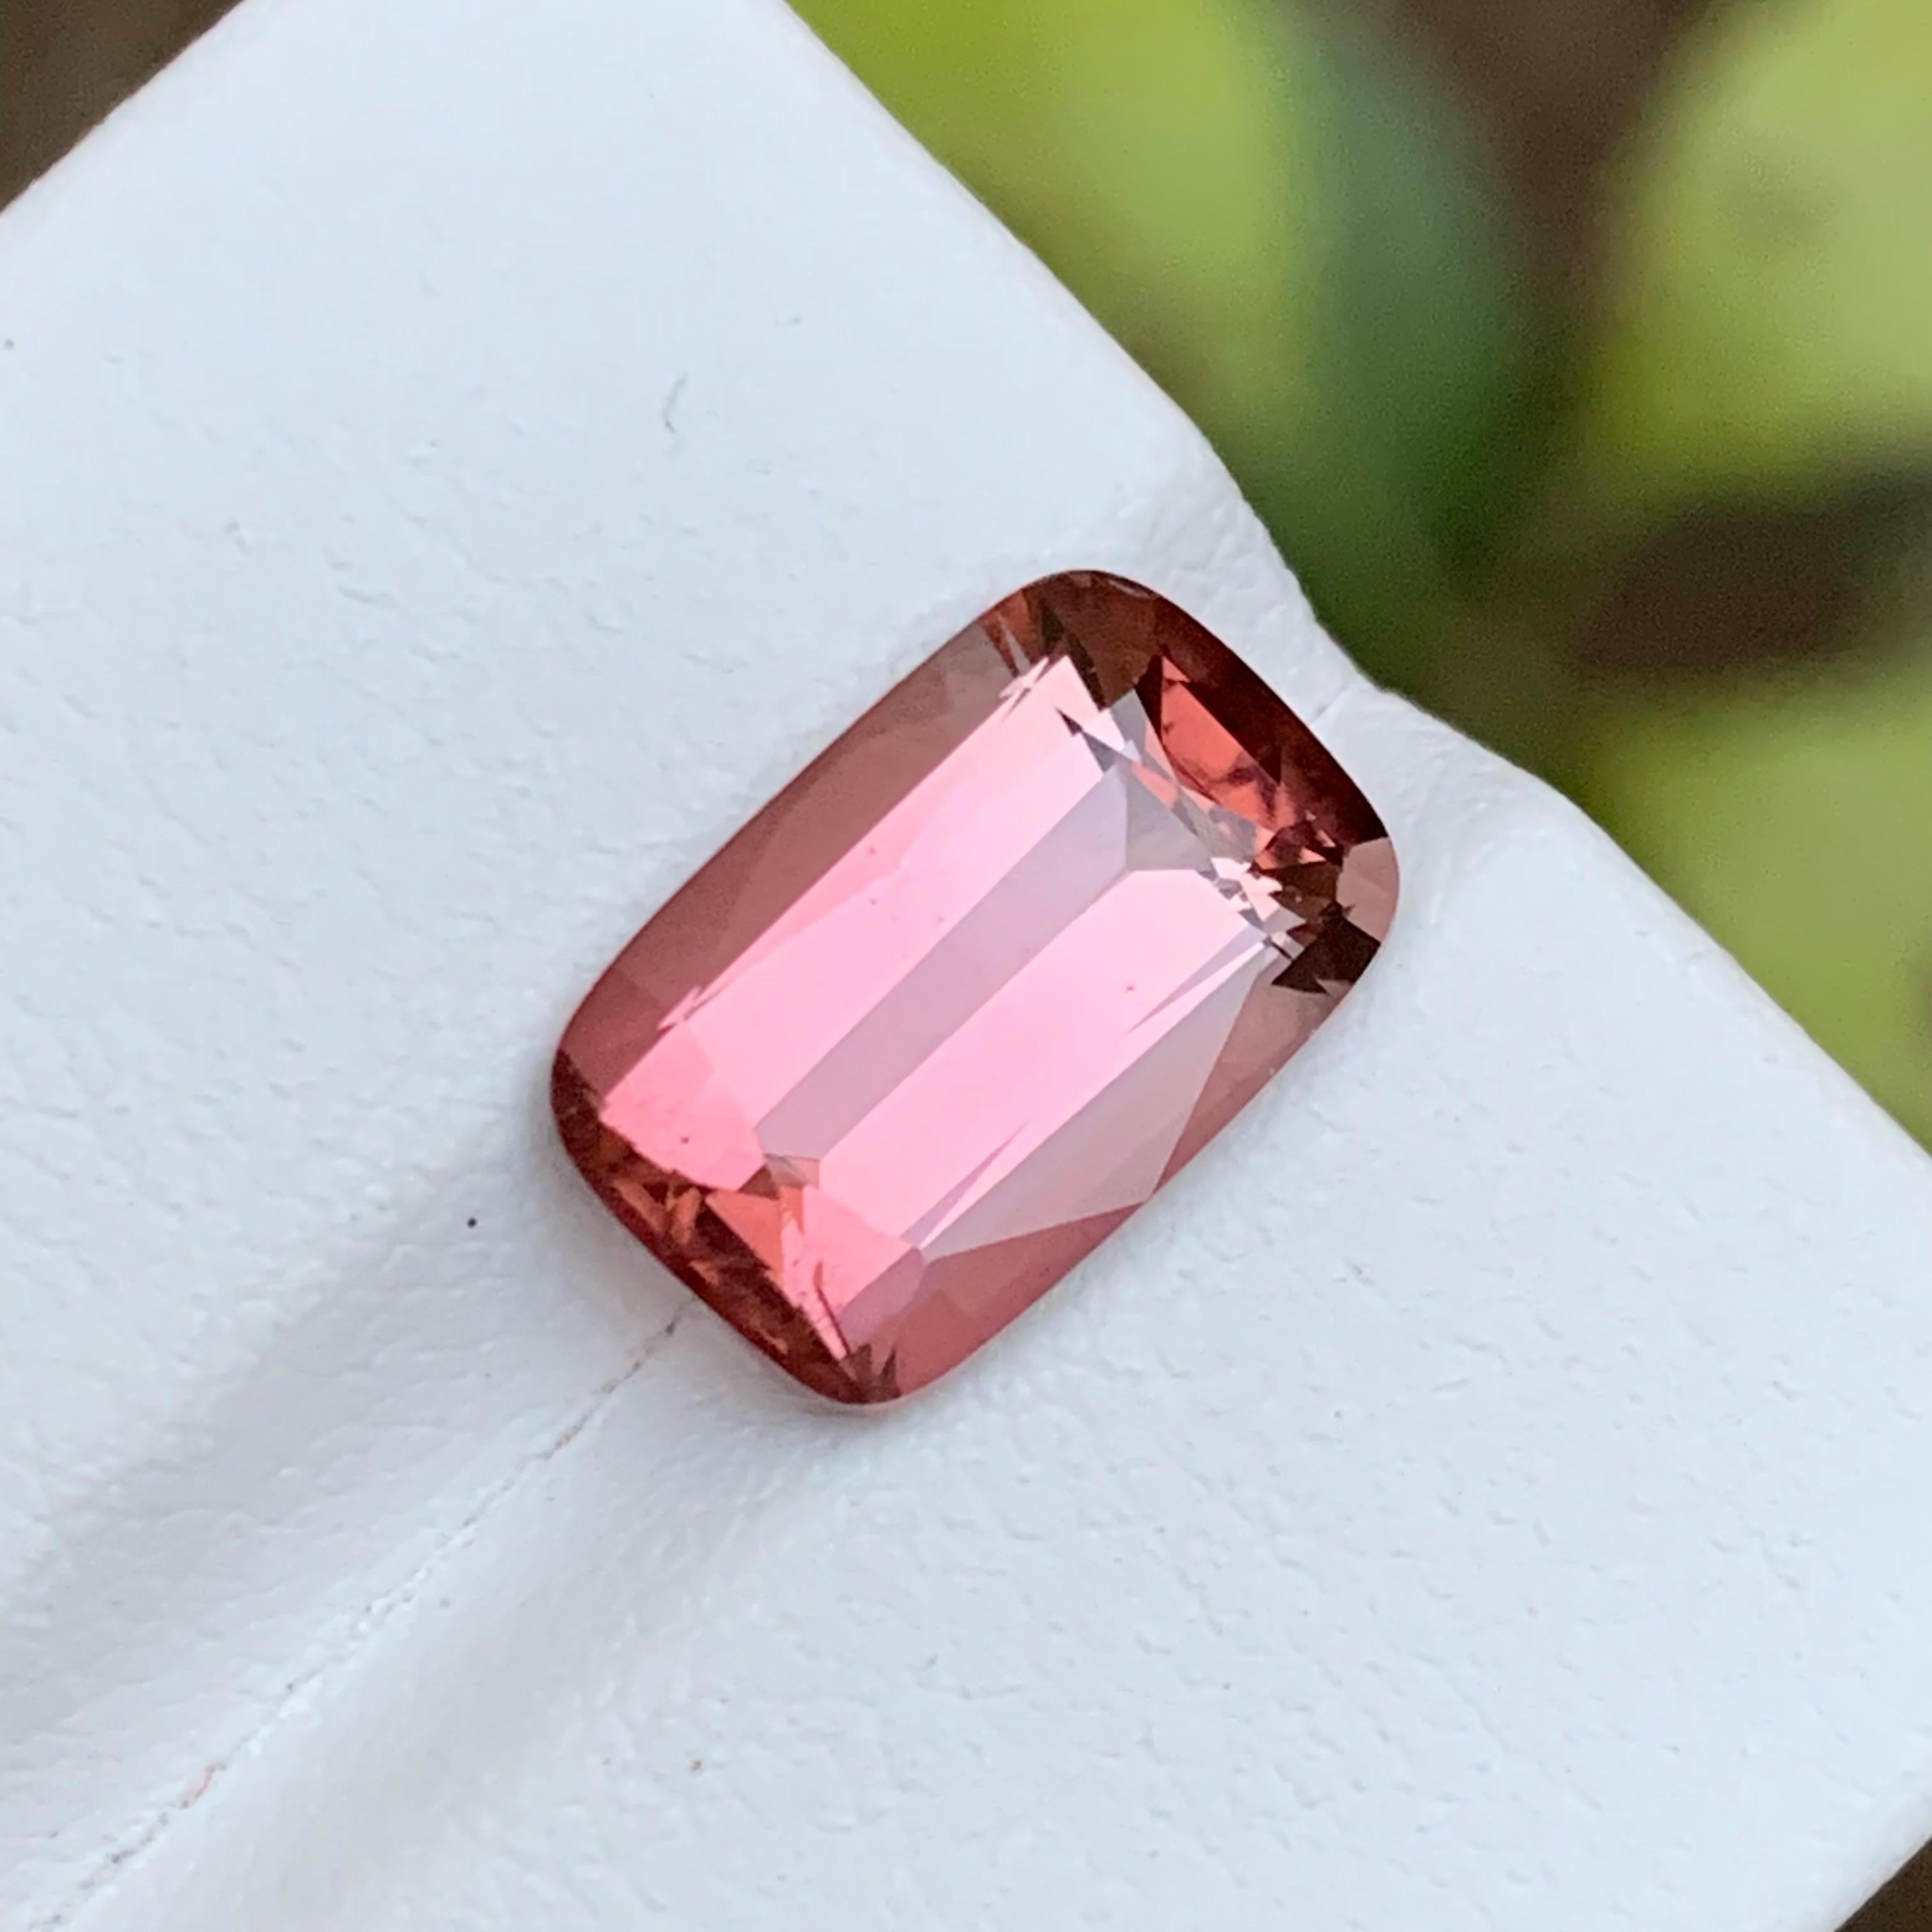 GEMSTONE TYPE: Tourmaline
PIECE(S): 1
WEIGHT: 4 Carats
SHAPE: Emerald
SIZE (MM):  12.07 x 7.87 x 5.49
COLOR: Pink 
CLARITY: Eye Clean
TREATMENT: Heated
ORIGIN: Afghanistan
CERTIFICATE: On demand

This mesmerizing 4 carat pink tourmaline gemstone,